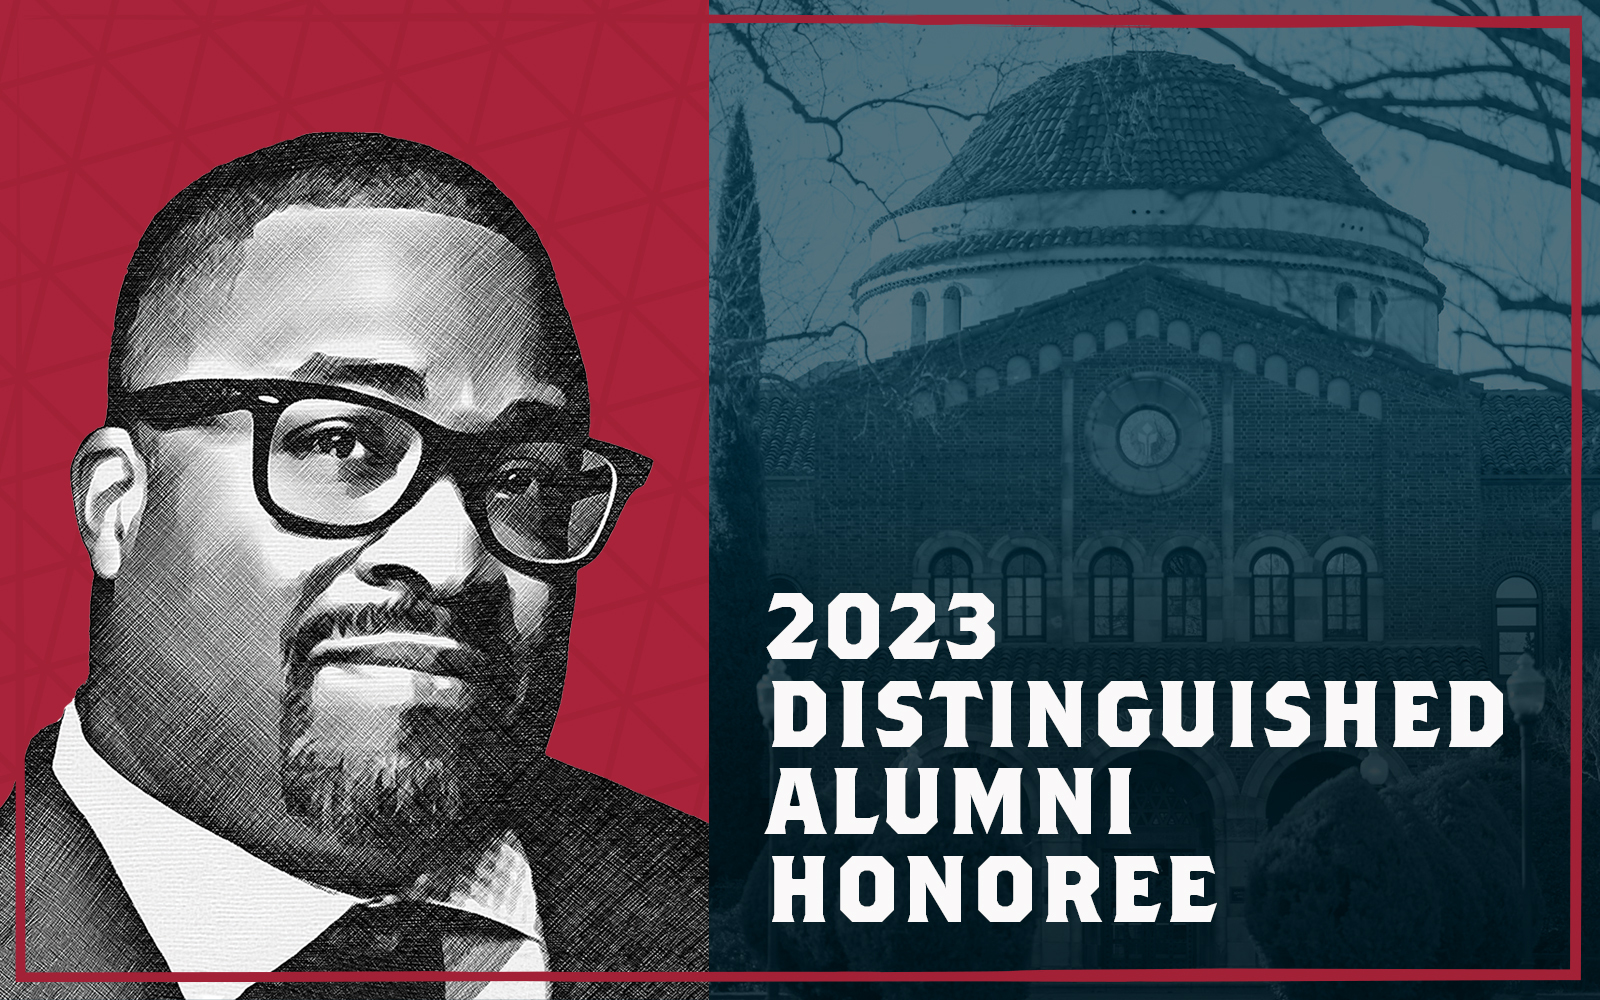 Stylish photo of Rick Callender next to words that say 2023 Distinguished Alumni Honoree